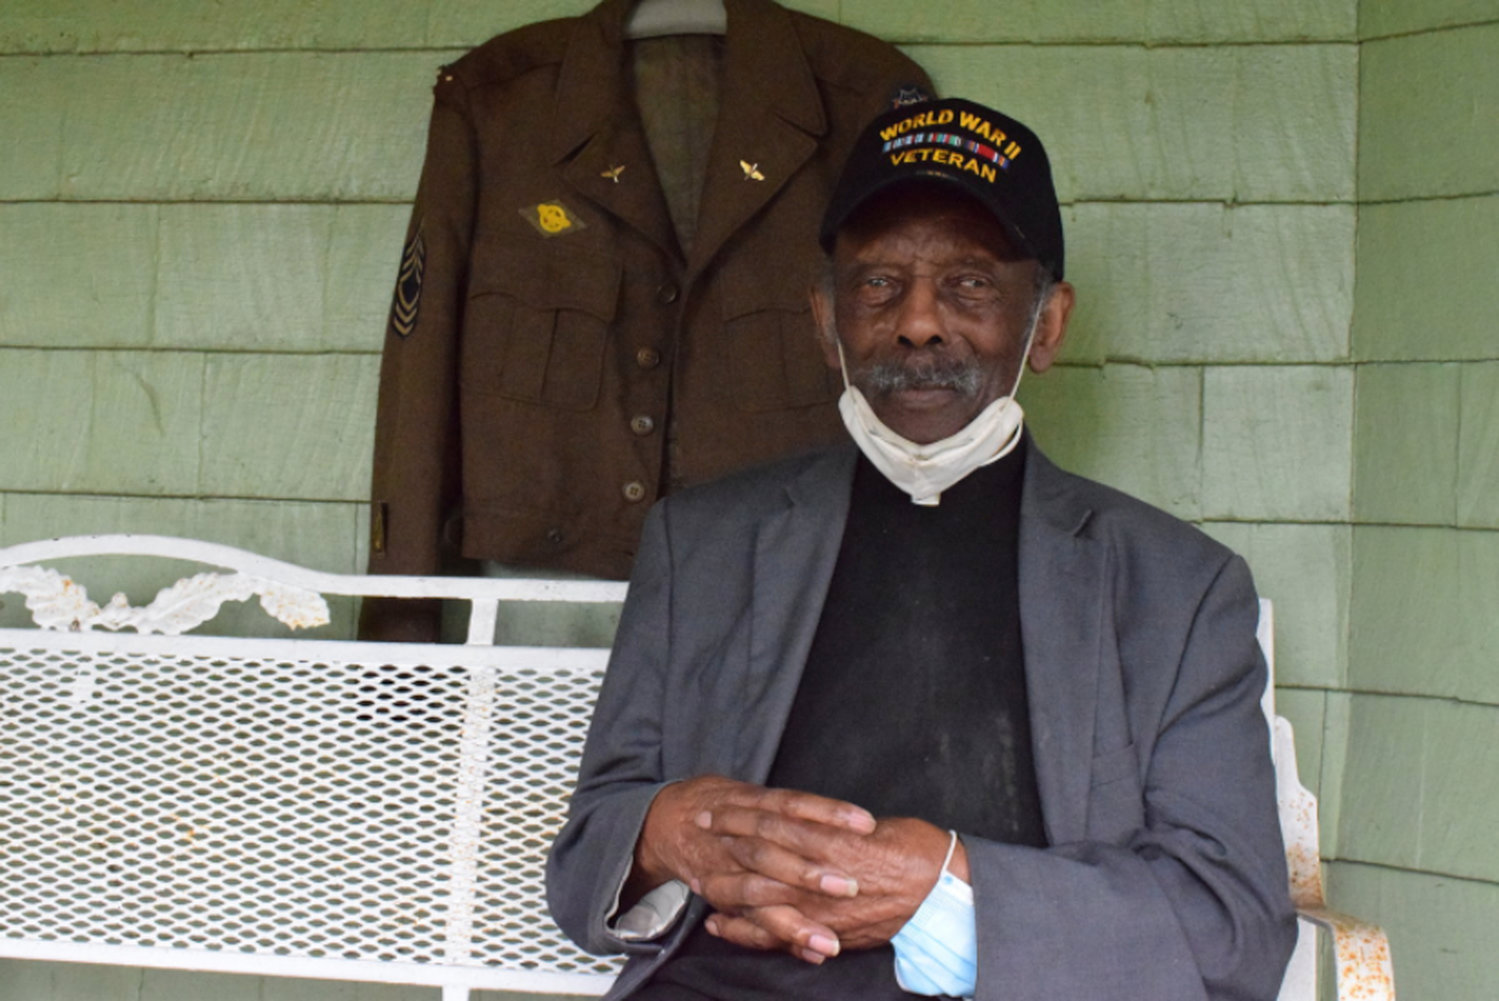 Members of the Freeport and East Meadow communities are raising money to fund a health care aid for 97-year old World War II veteran Rev. Eugene Purvis and his wife Dr. Sylvia Purvis.